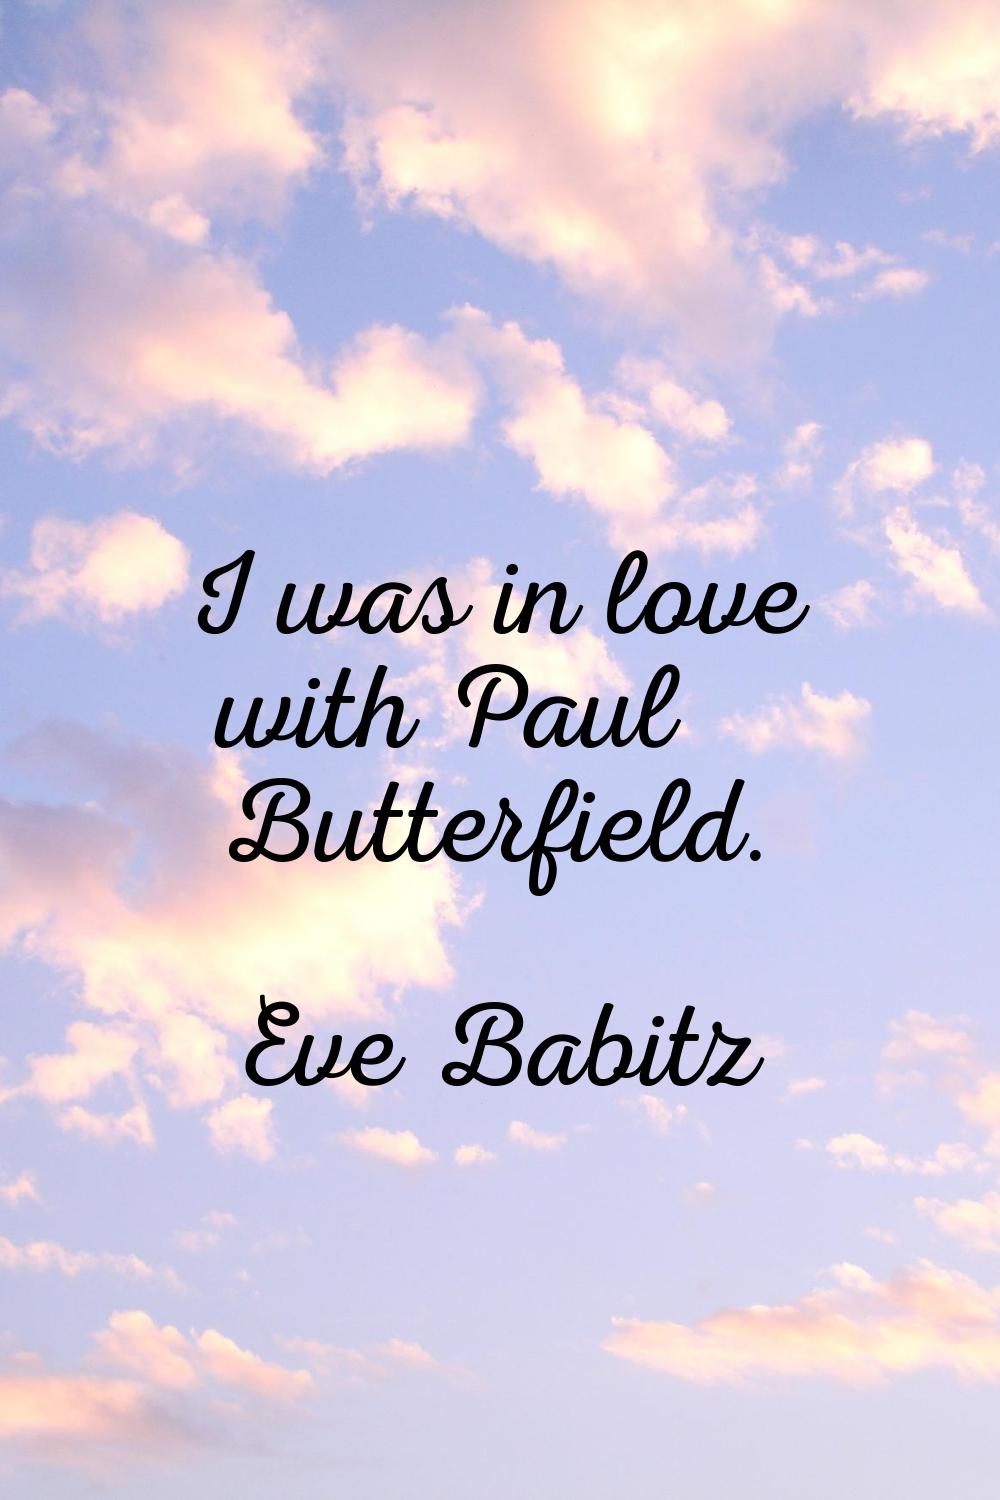 I was in love with Paul Butterfield.